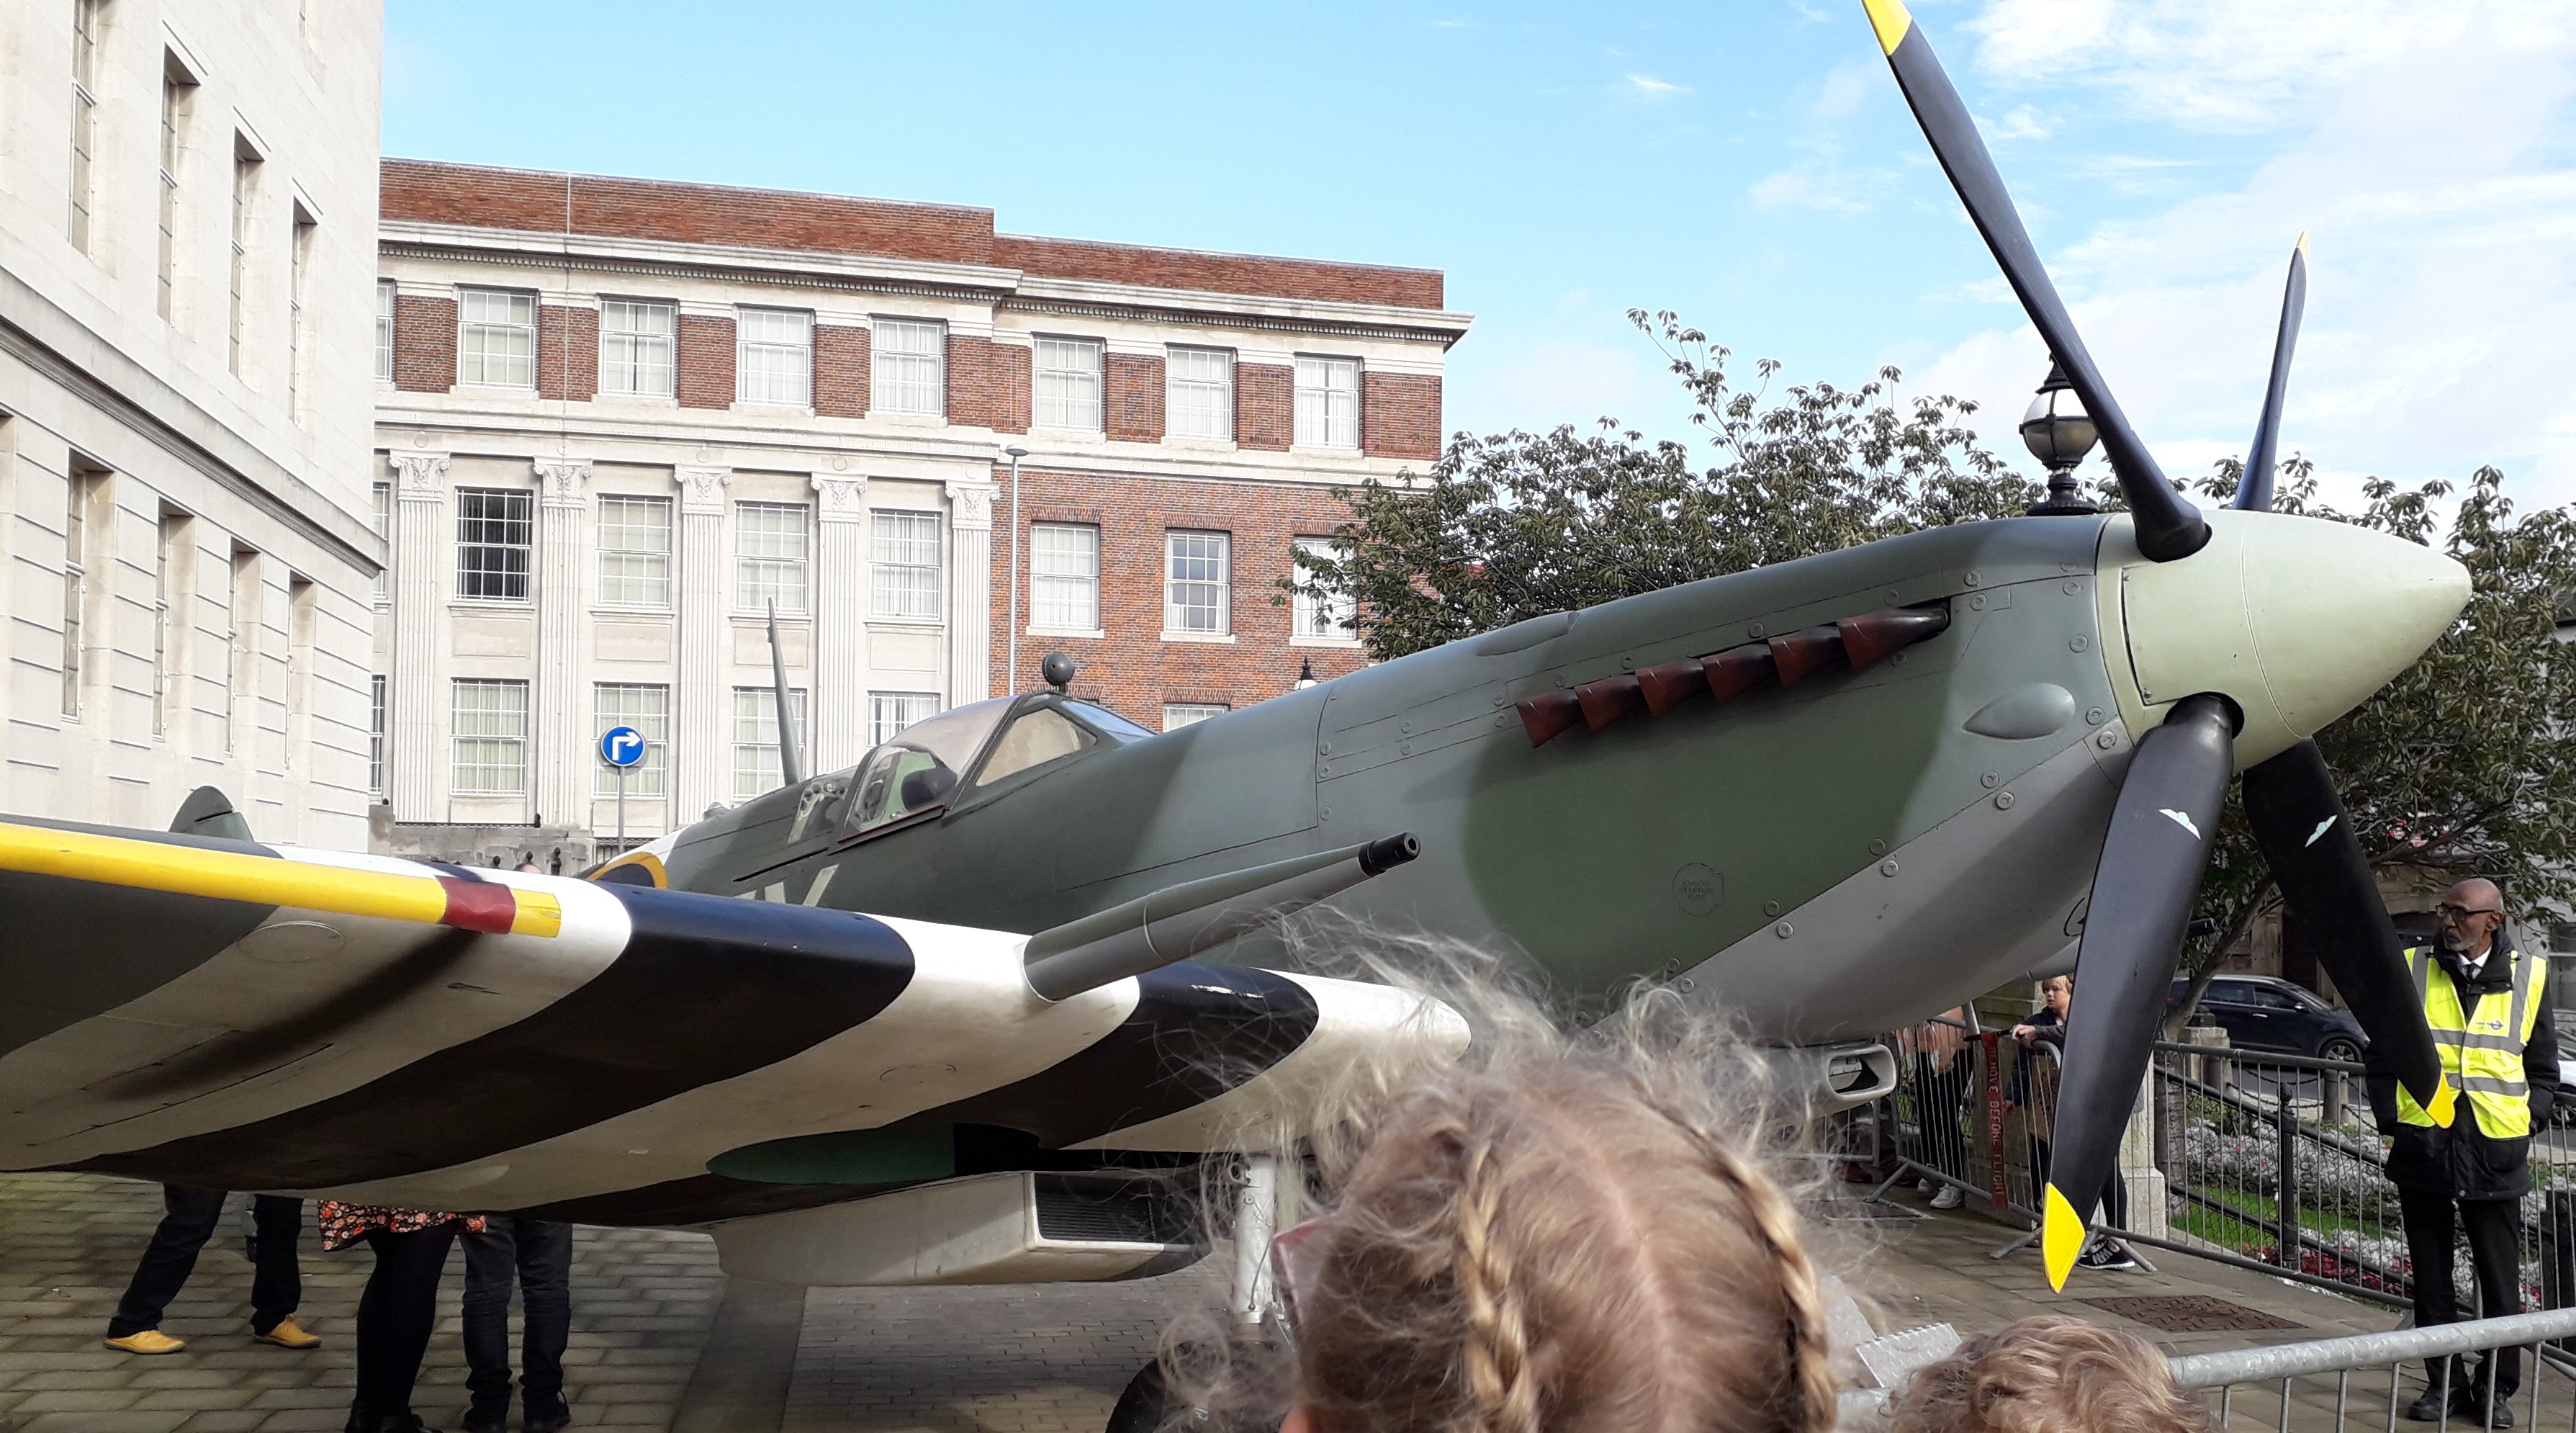 Image for Wonderful Spitfire at Barnsley Town Hall on 12 October 2019.